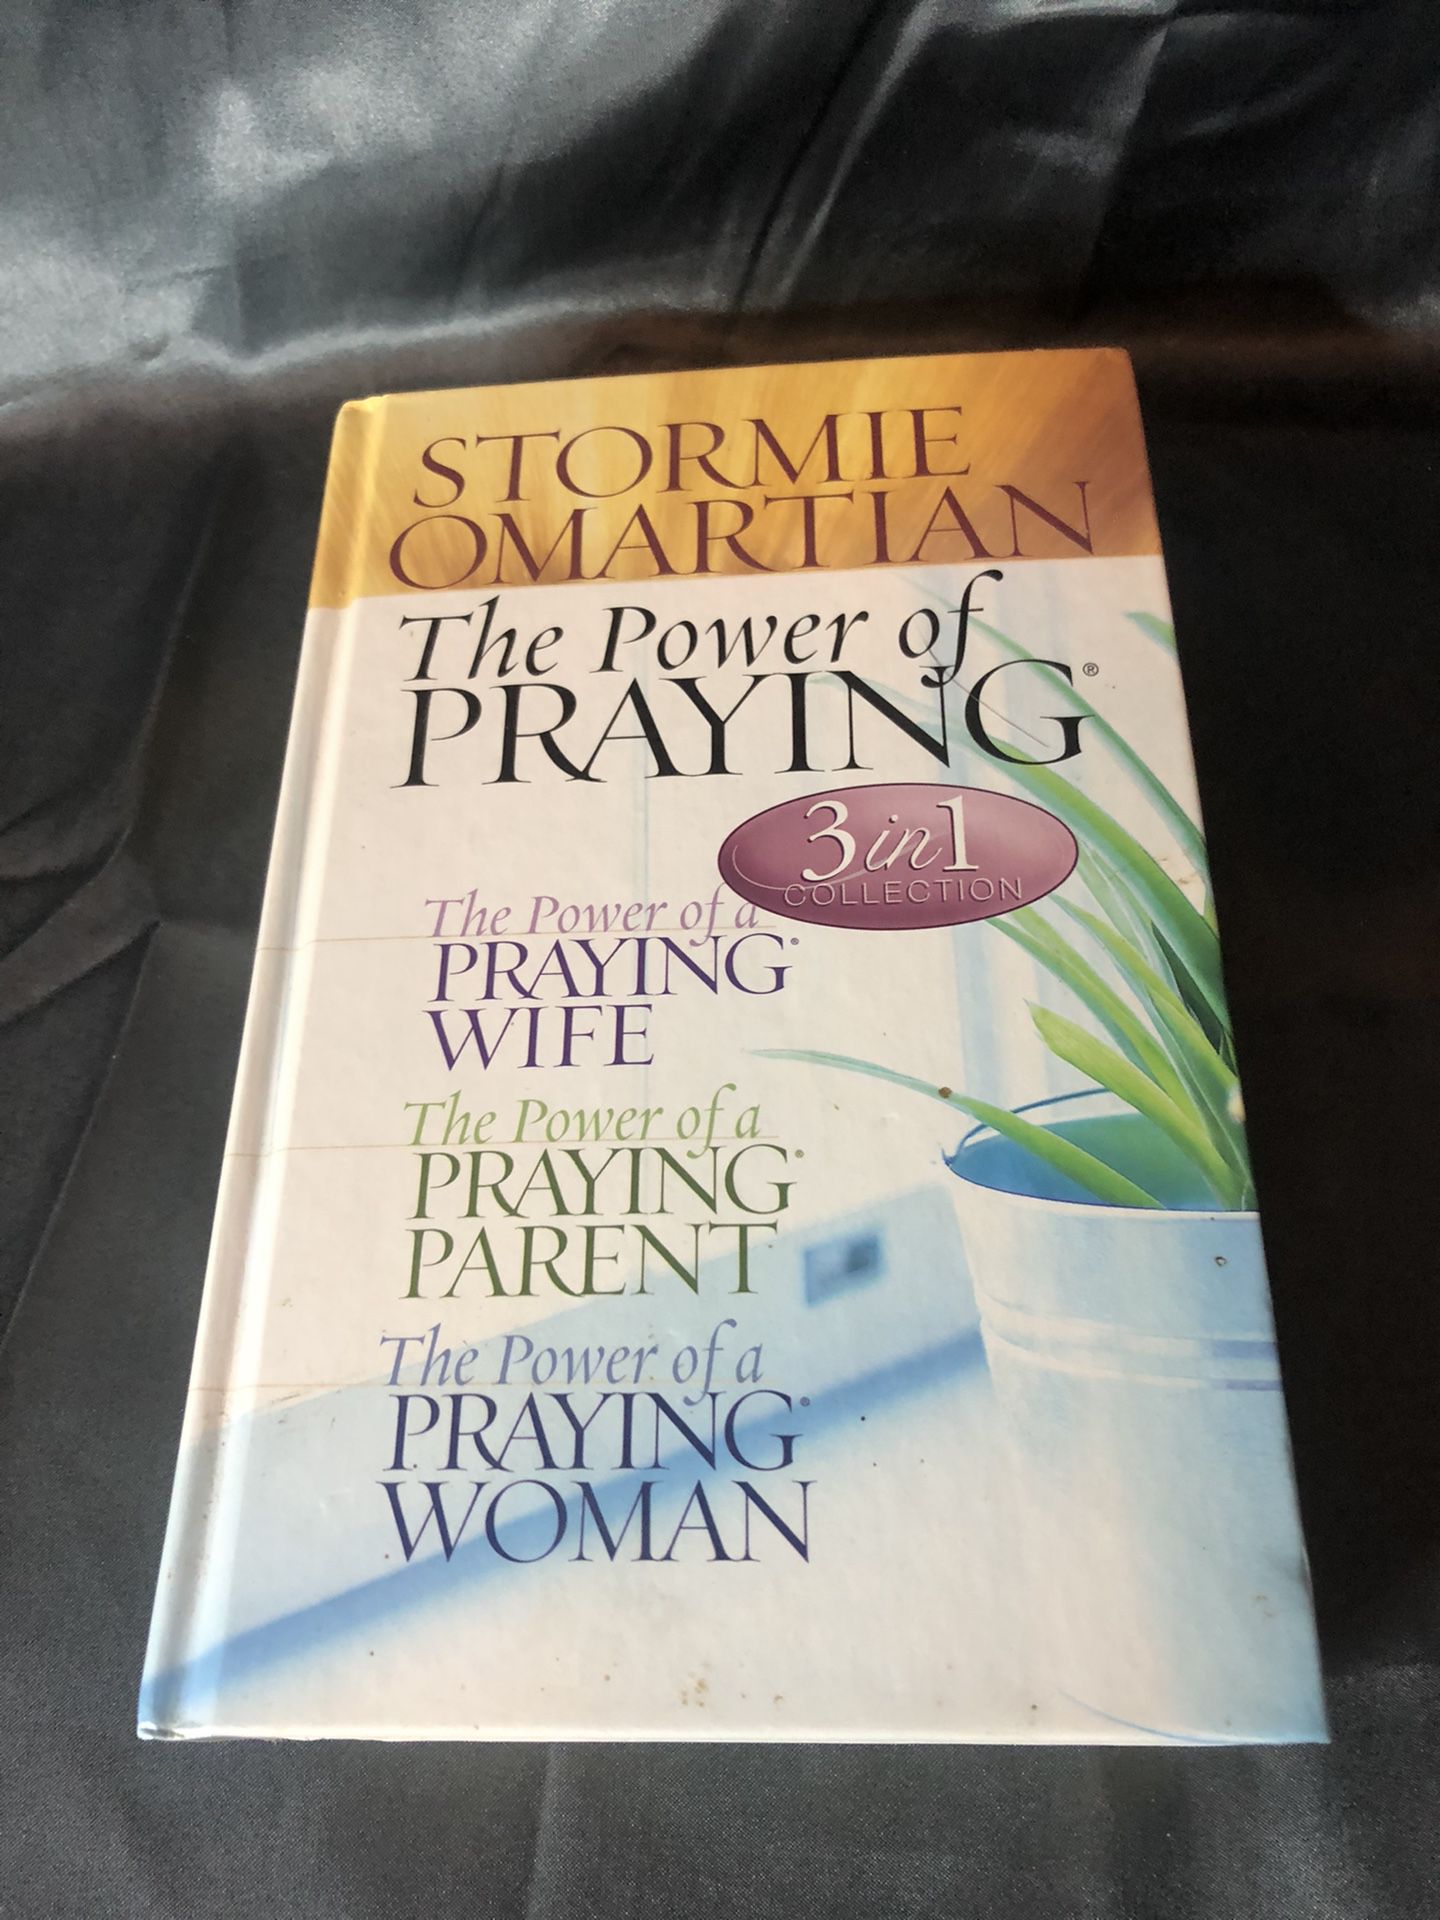  THE POWER OF PRAYING (3 IN 1 COLLECTION: THE POWER OF A By Stormie Omartian - Good